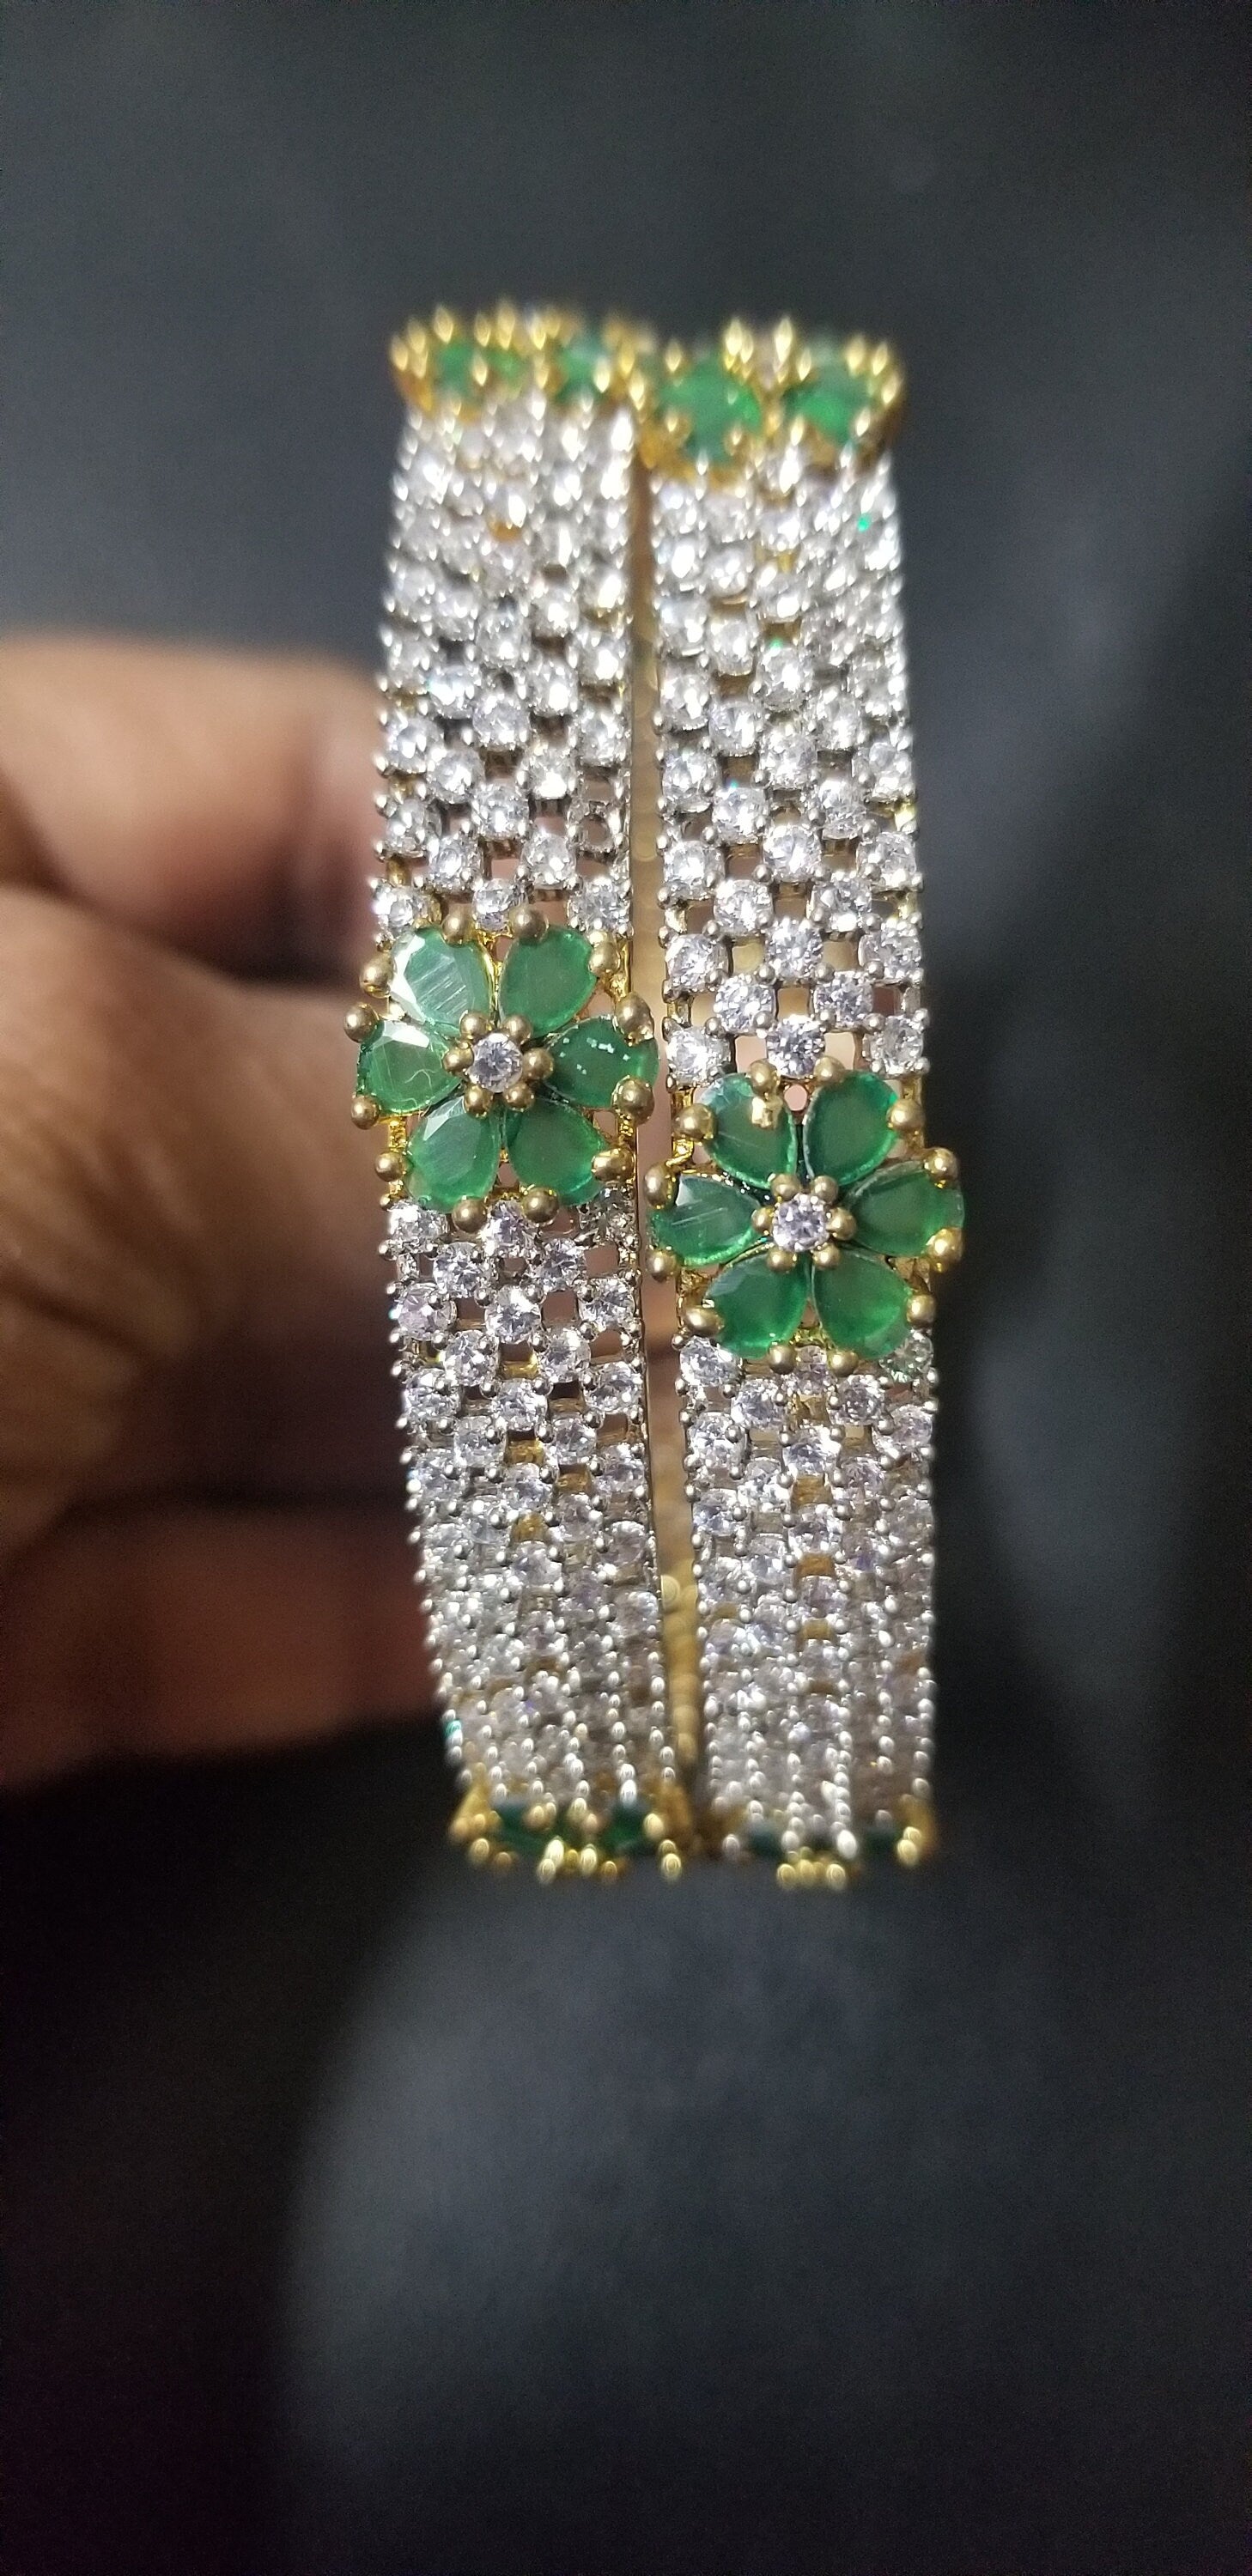 Premium Quality Gold finish AD White and Green stone flower type Bangles - Set of 2 bangles - Size 2.6